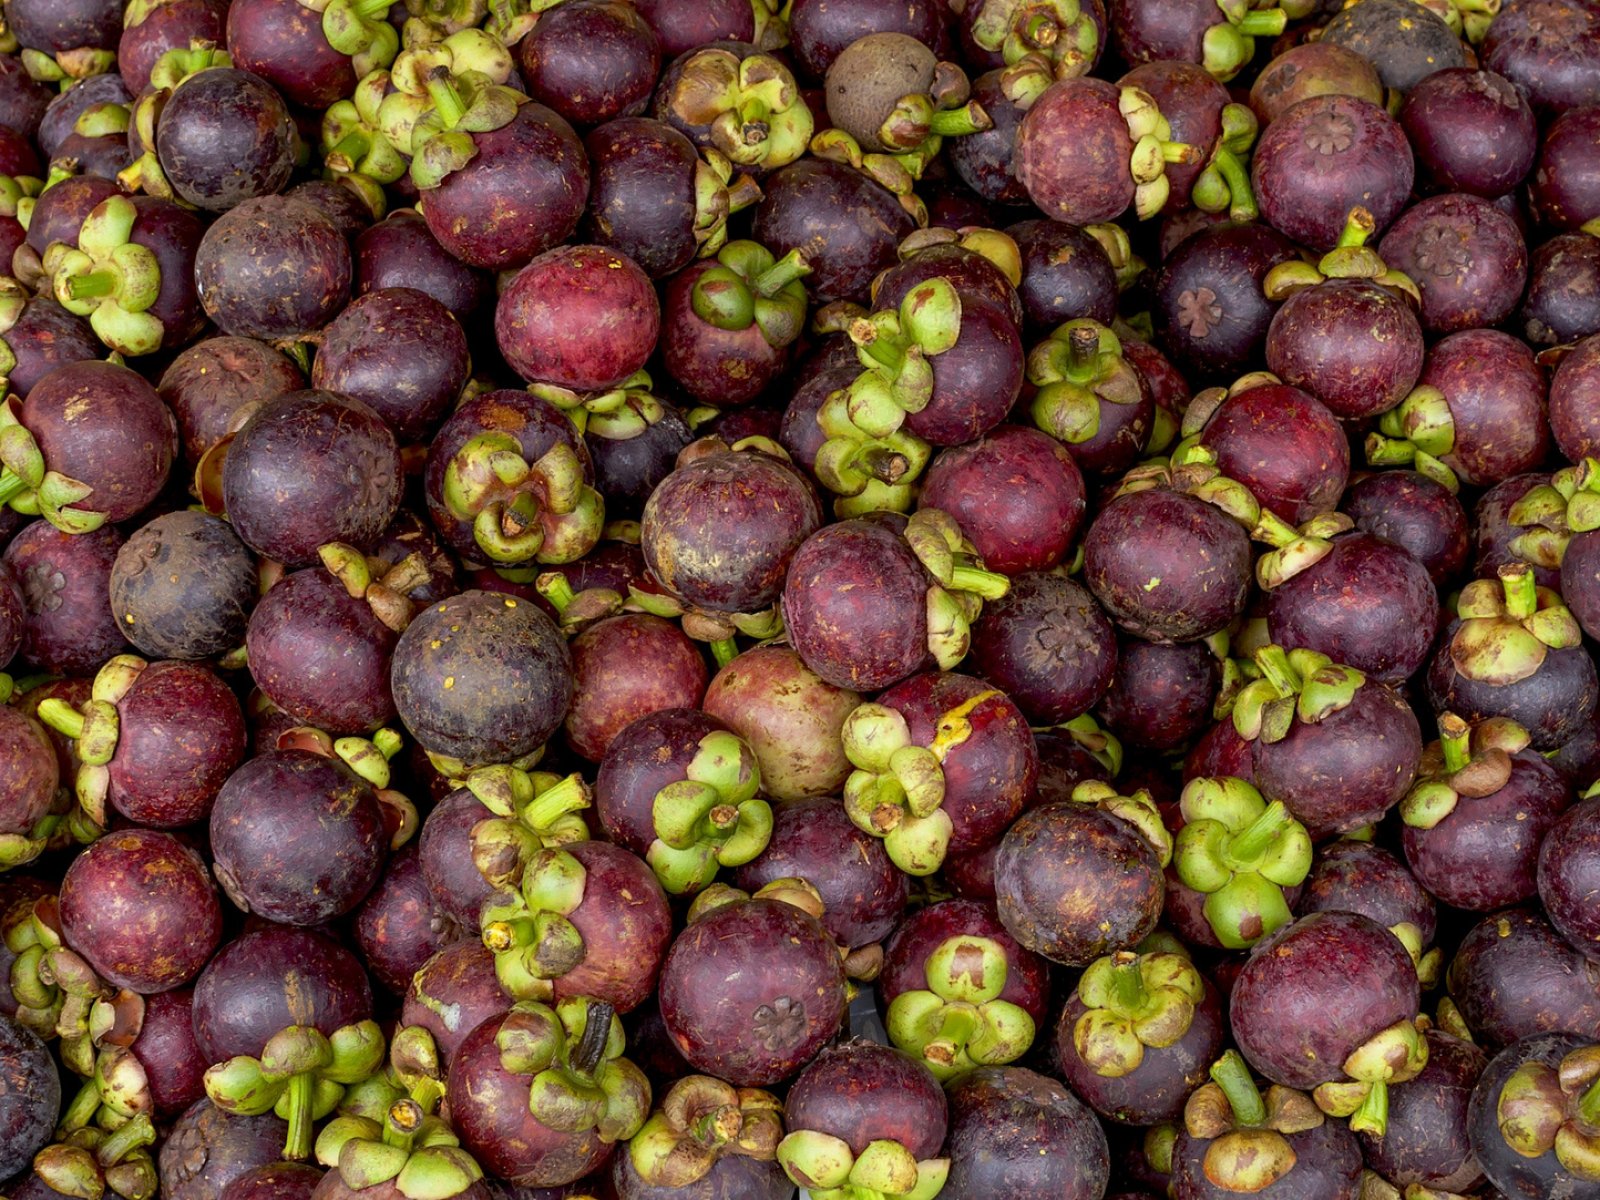 How to try mangosteen in Phuket